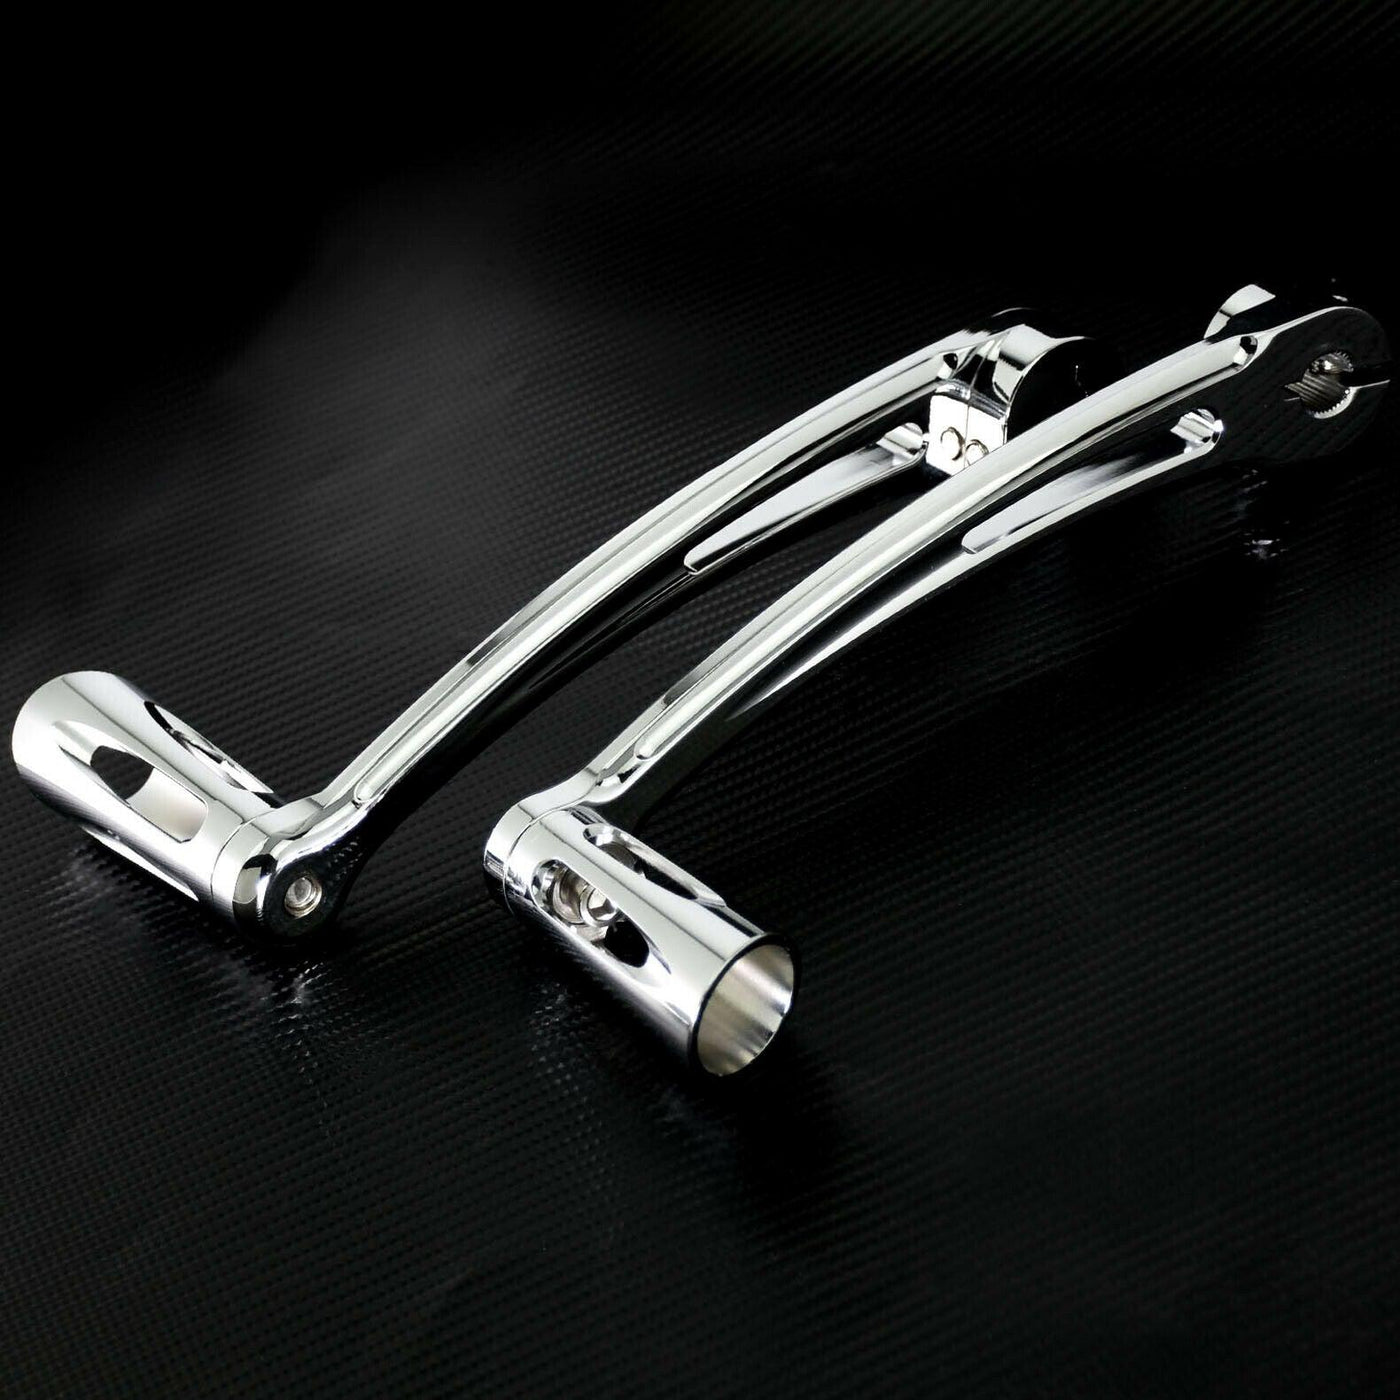 All Chrome Brake Arm Shift Lever Shifter Toe Pegs Fit For Harley Touring 2014-21 - Moto Life Products